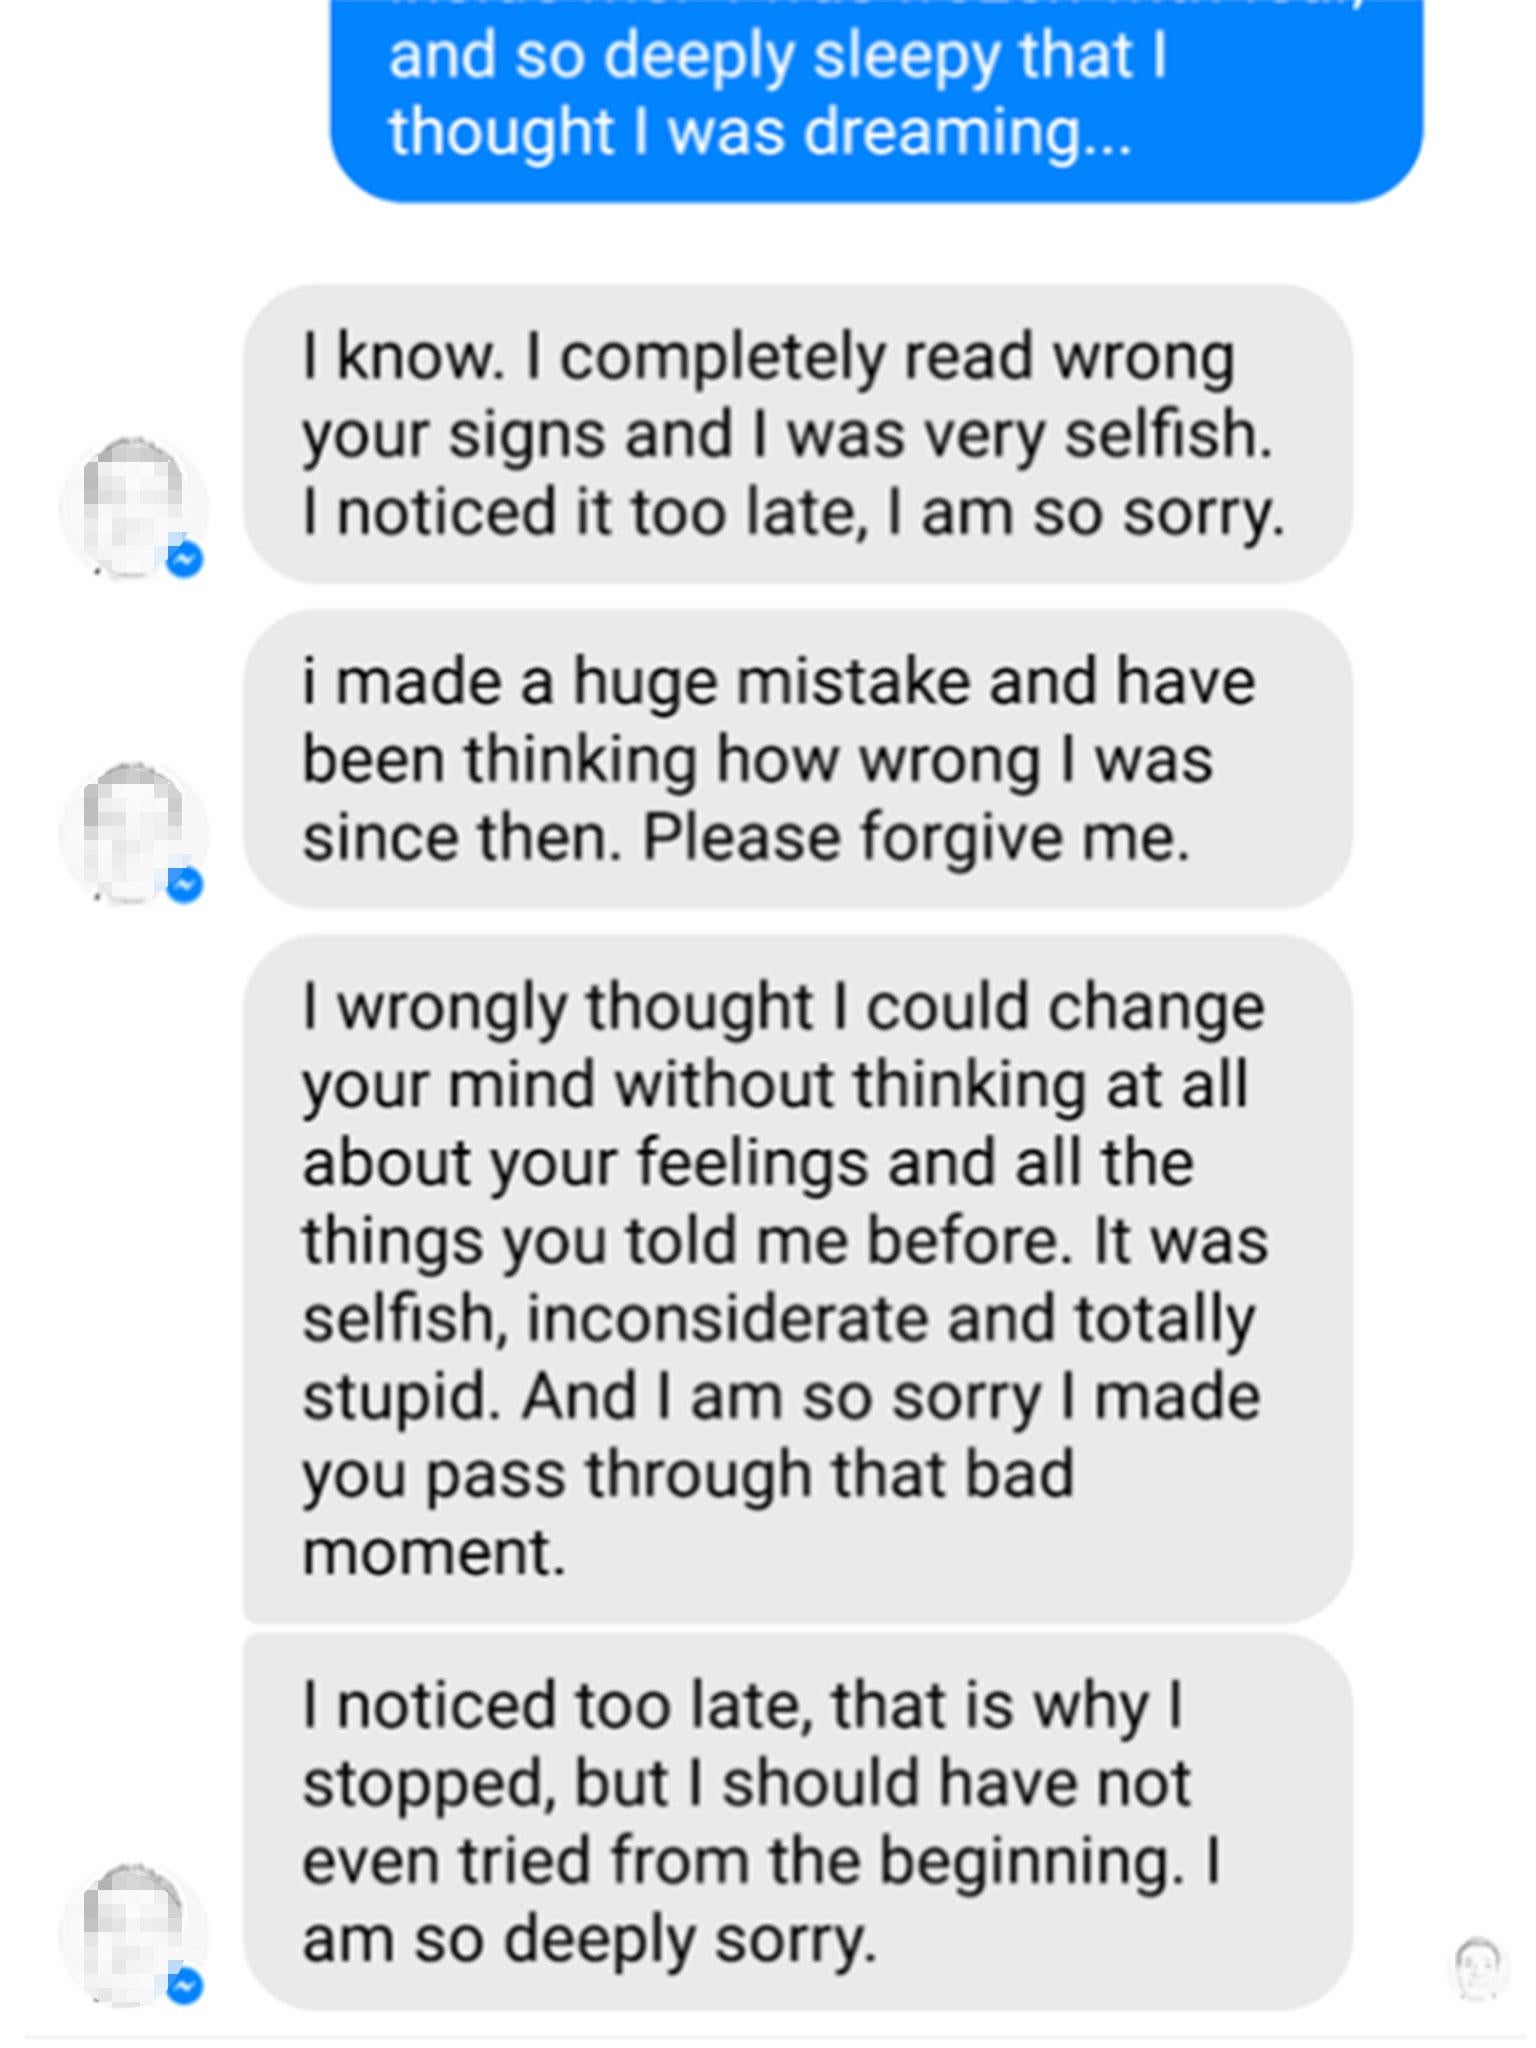 The Facebook messages continued